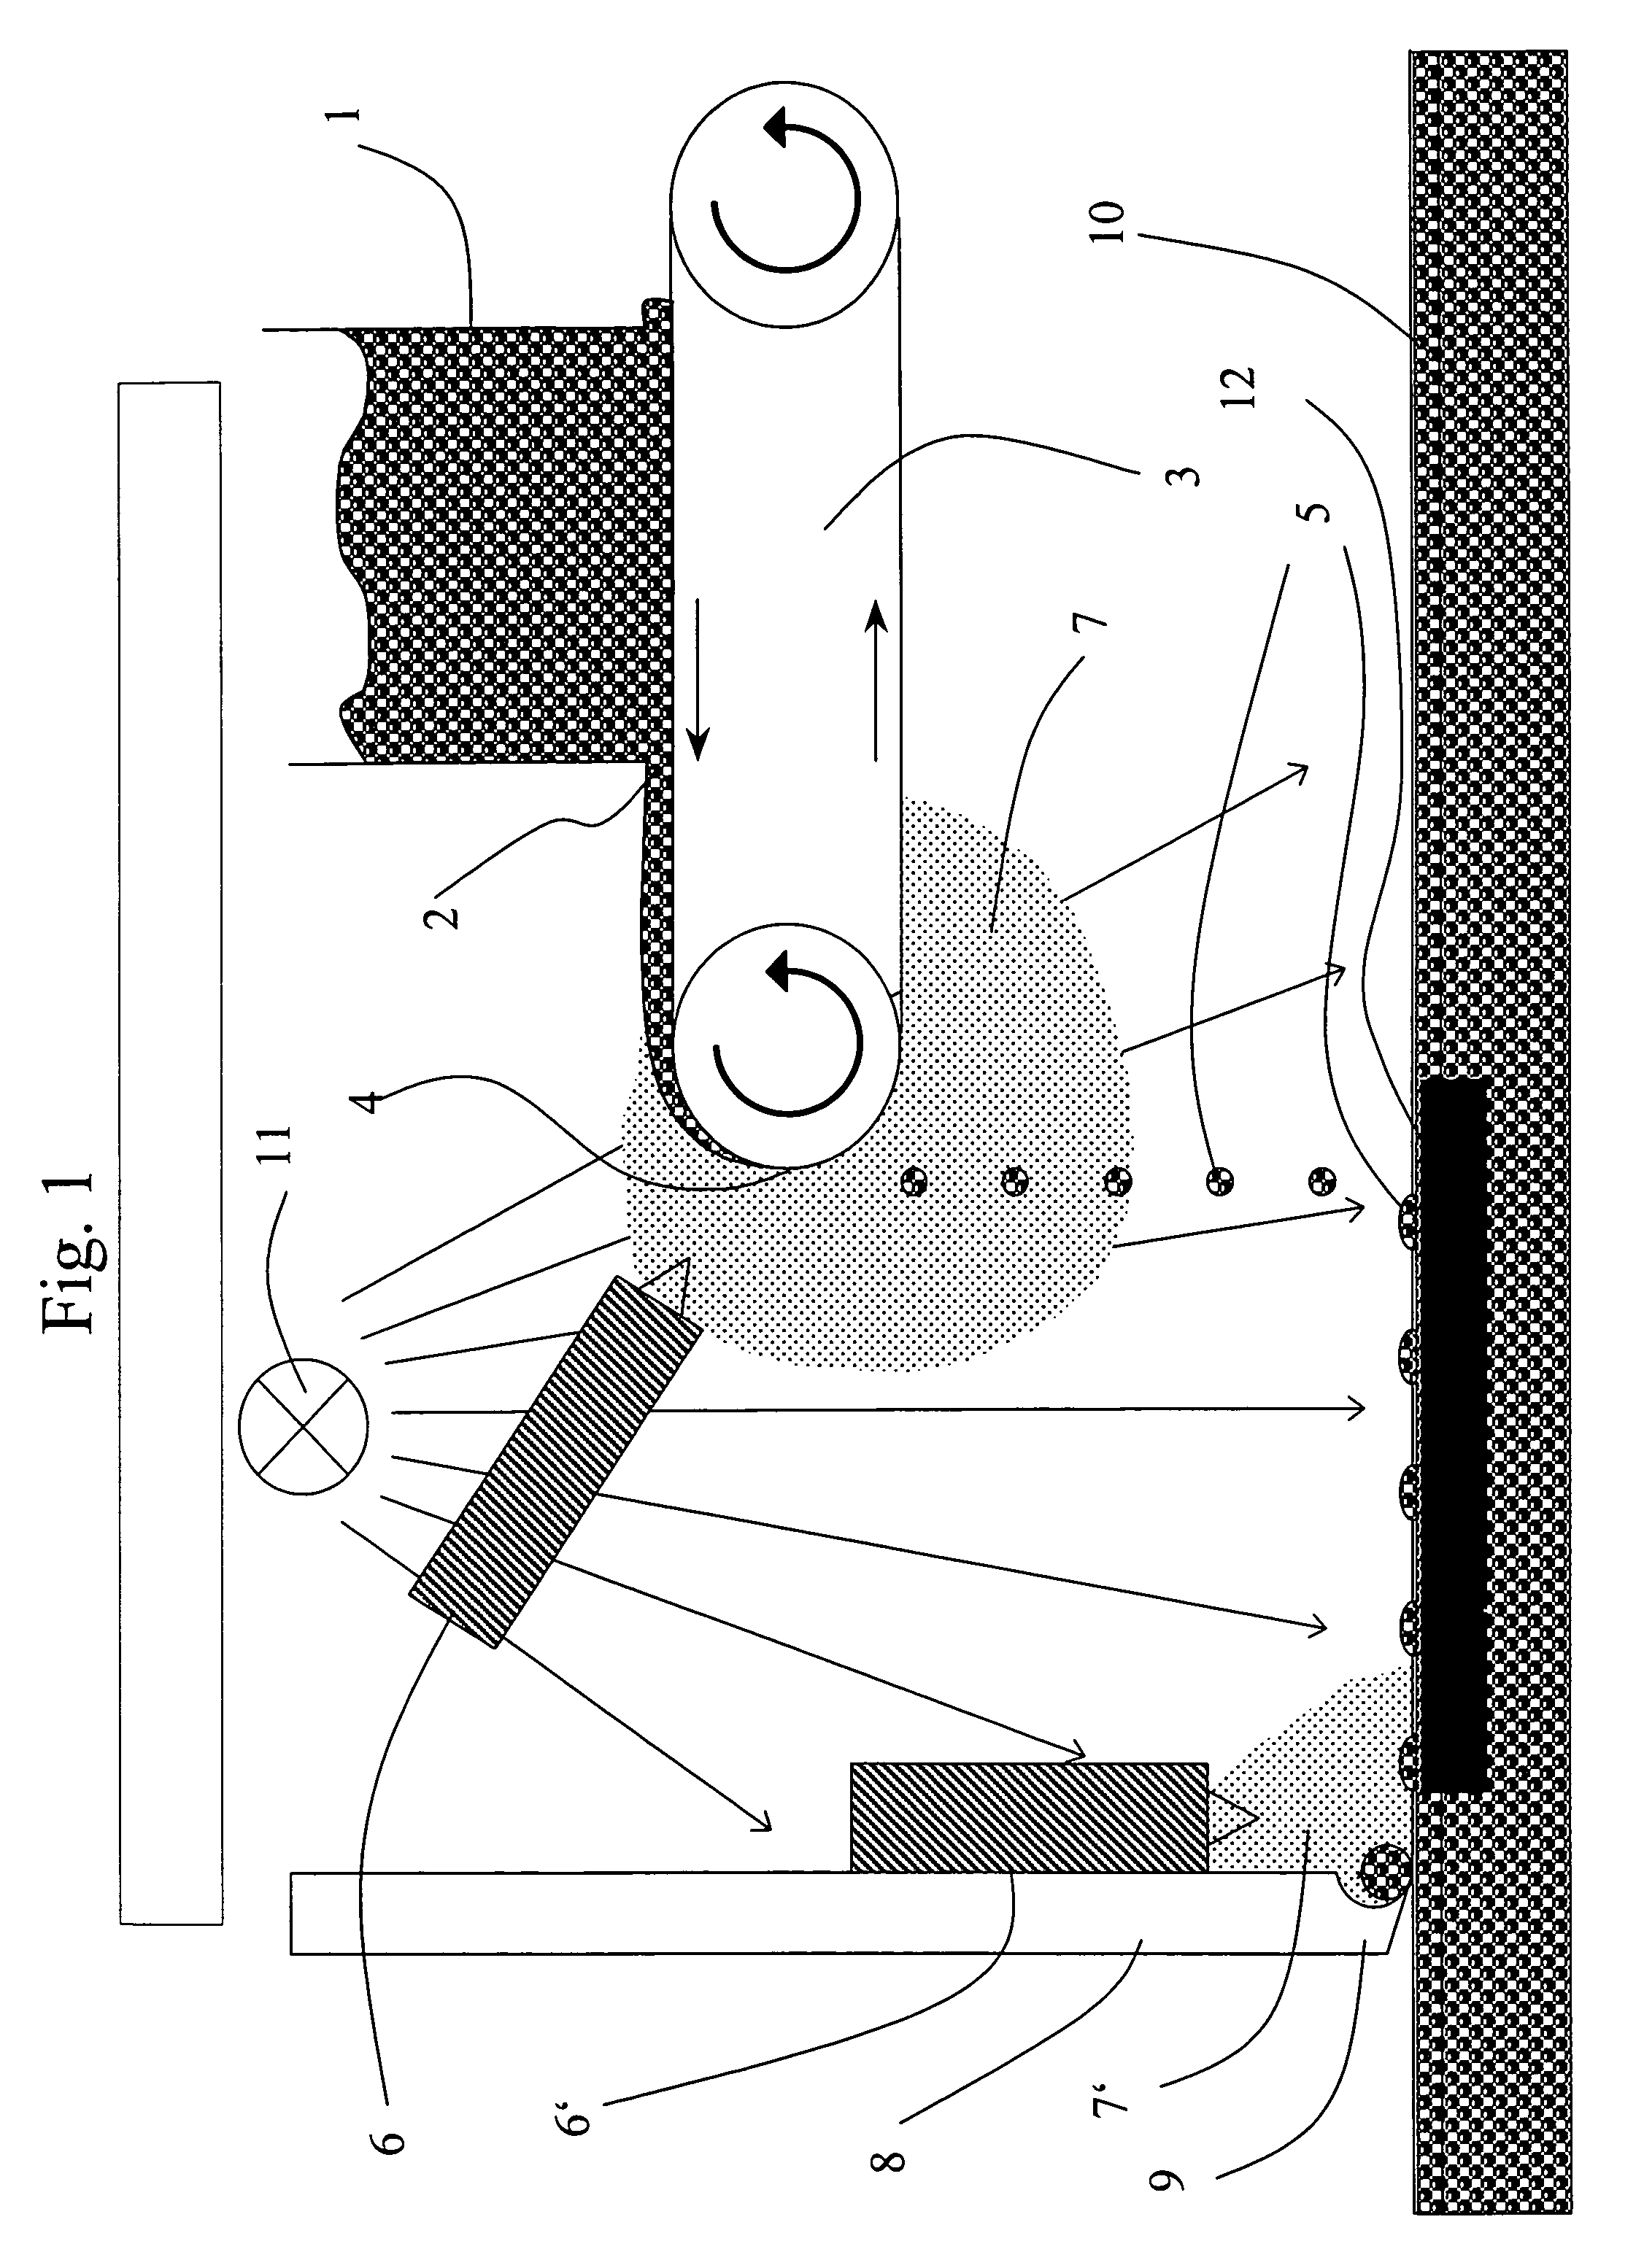 Process and device for producing solid bodies by sequential layer buildup